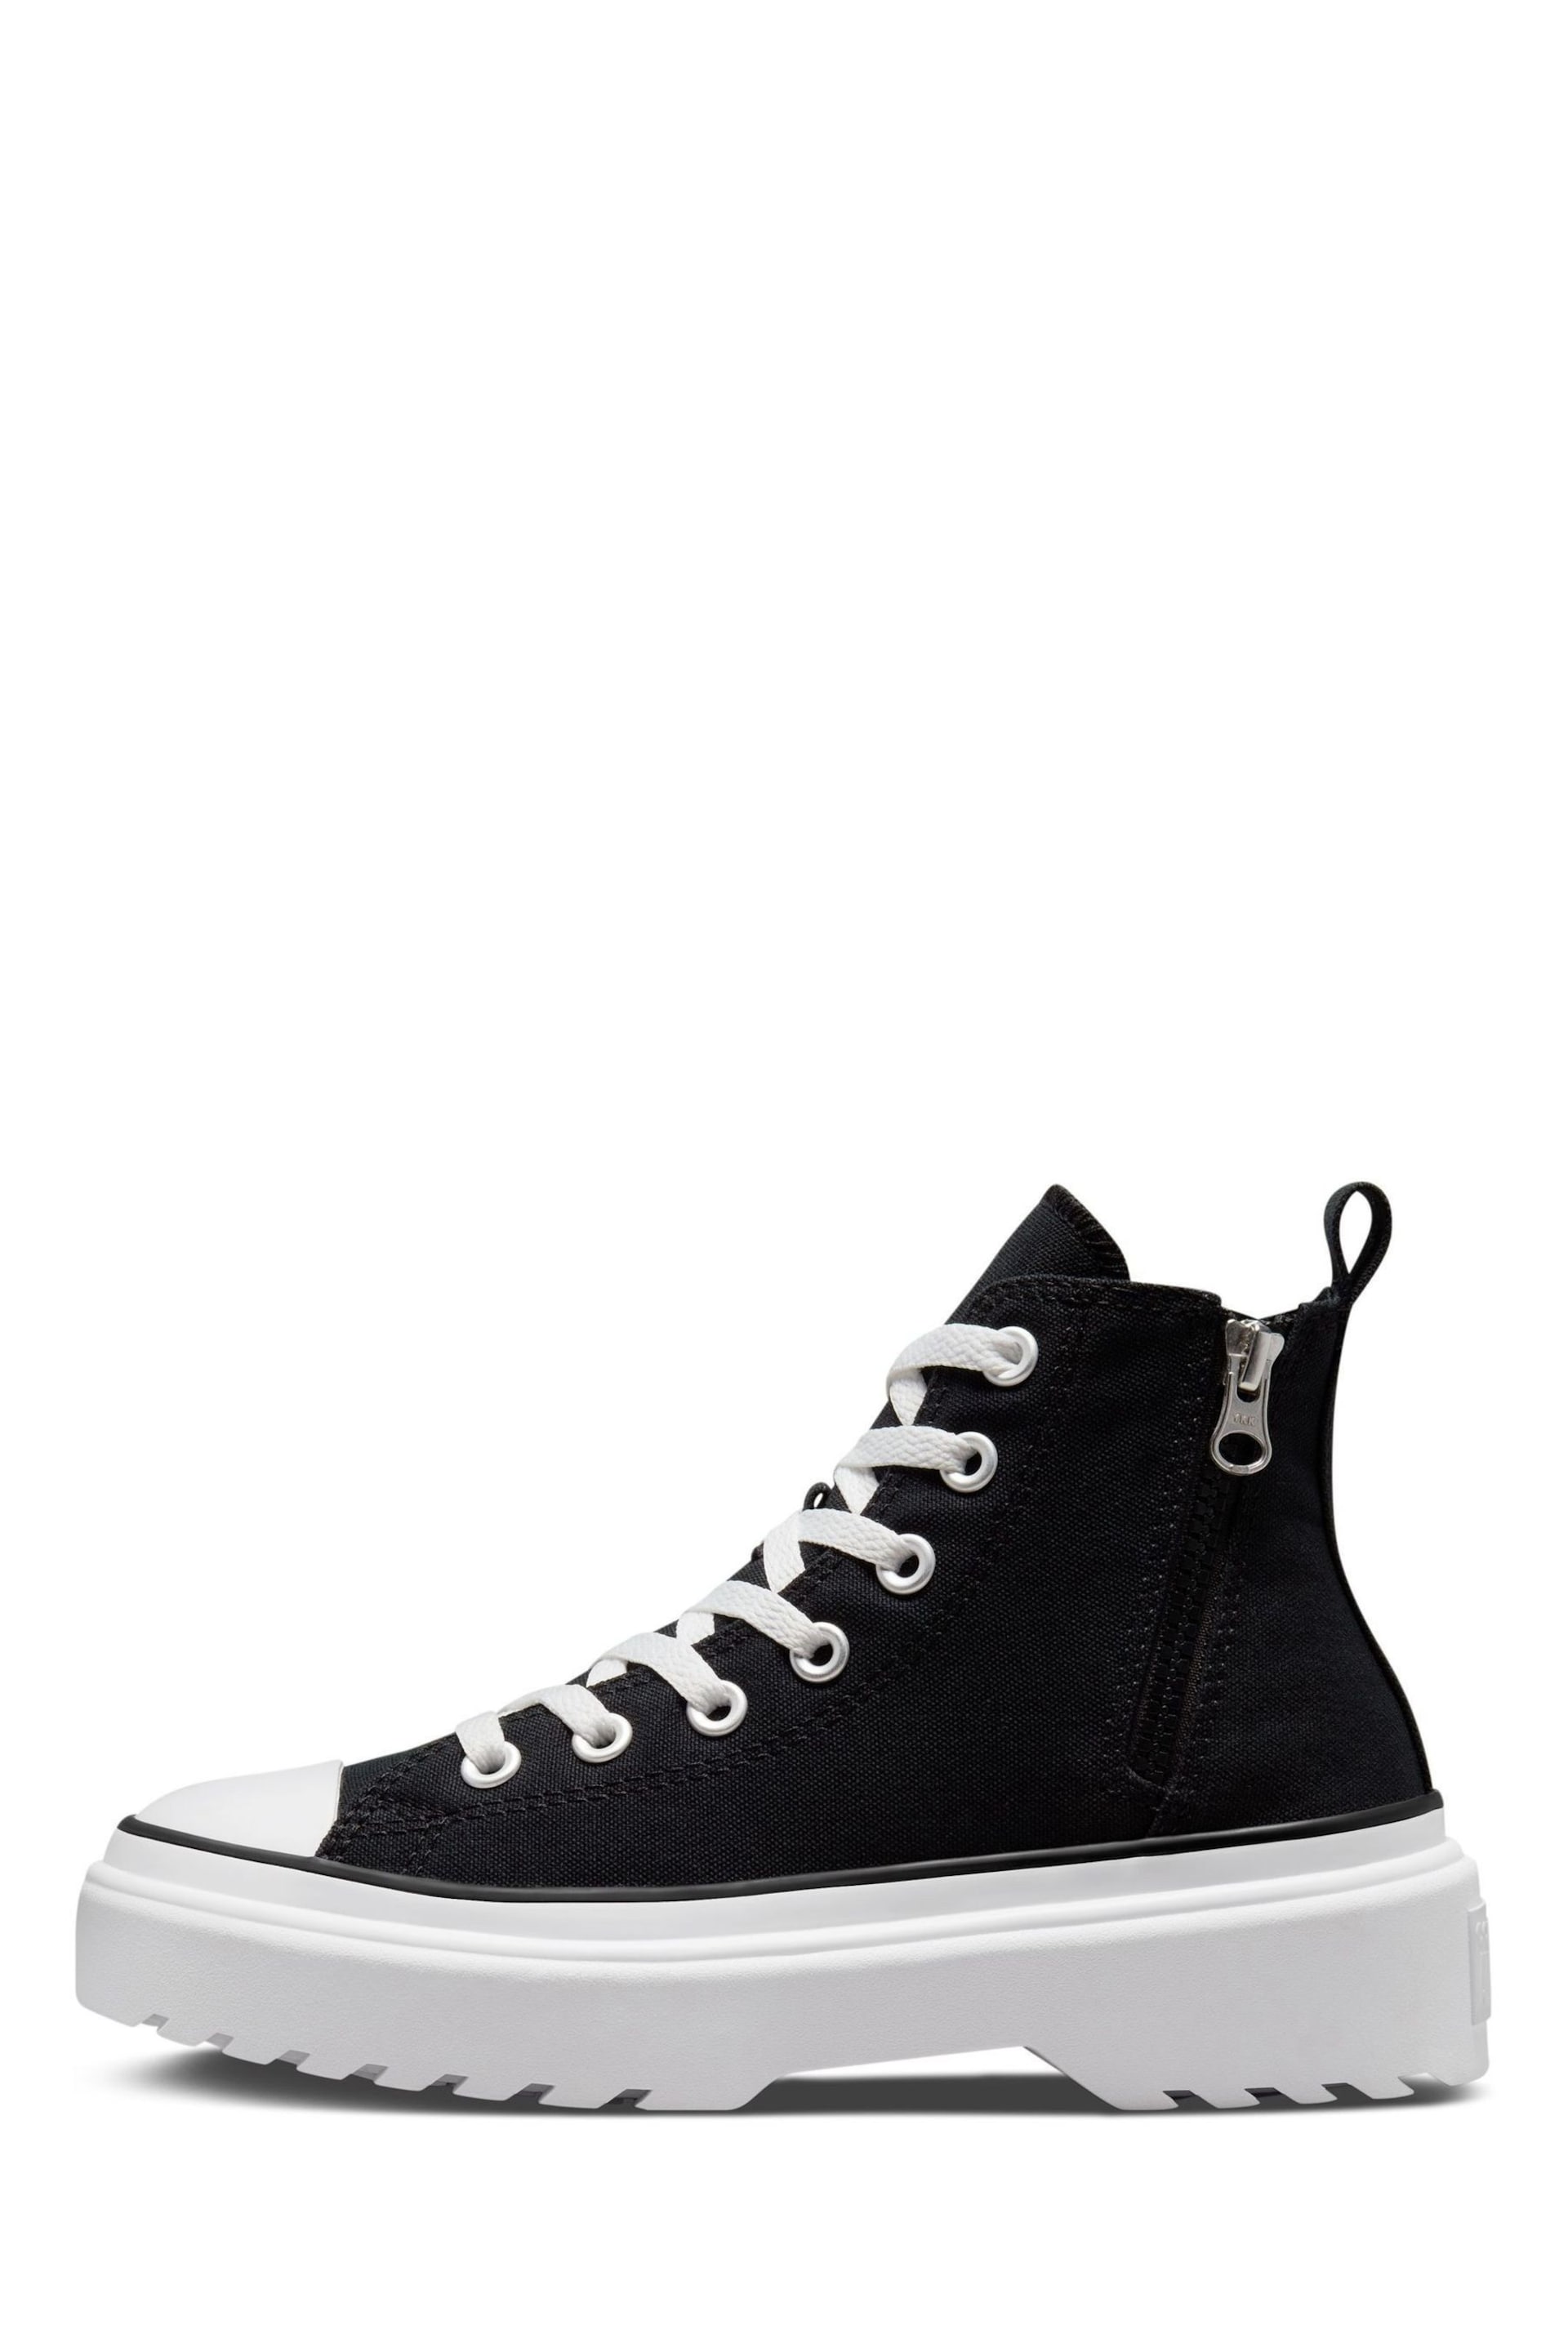 Converse Black Lugged Lift Youth Trainers - Image 2 of 9